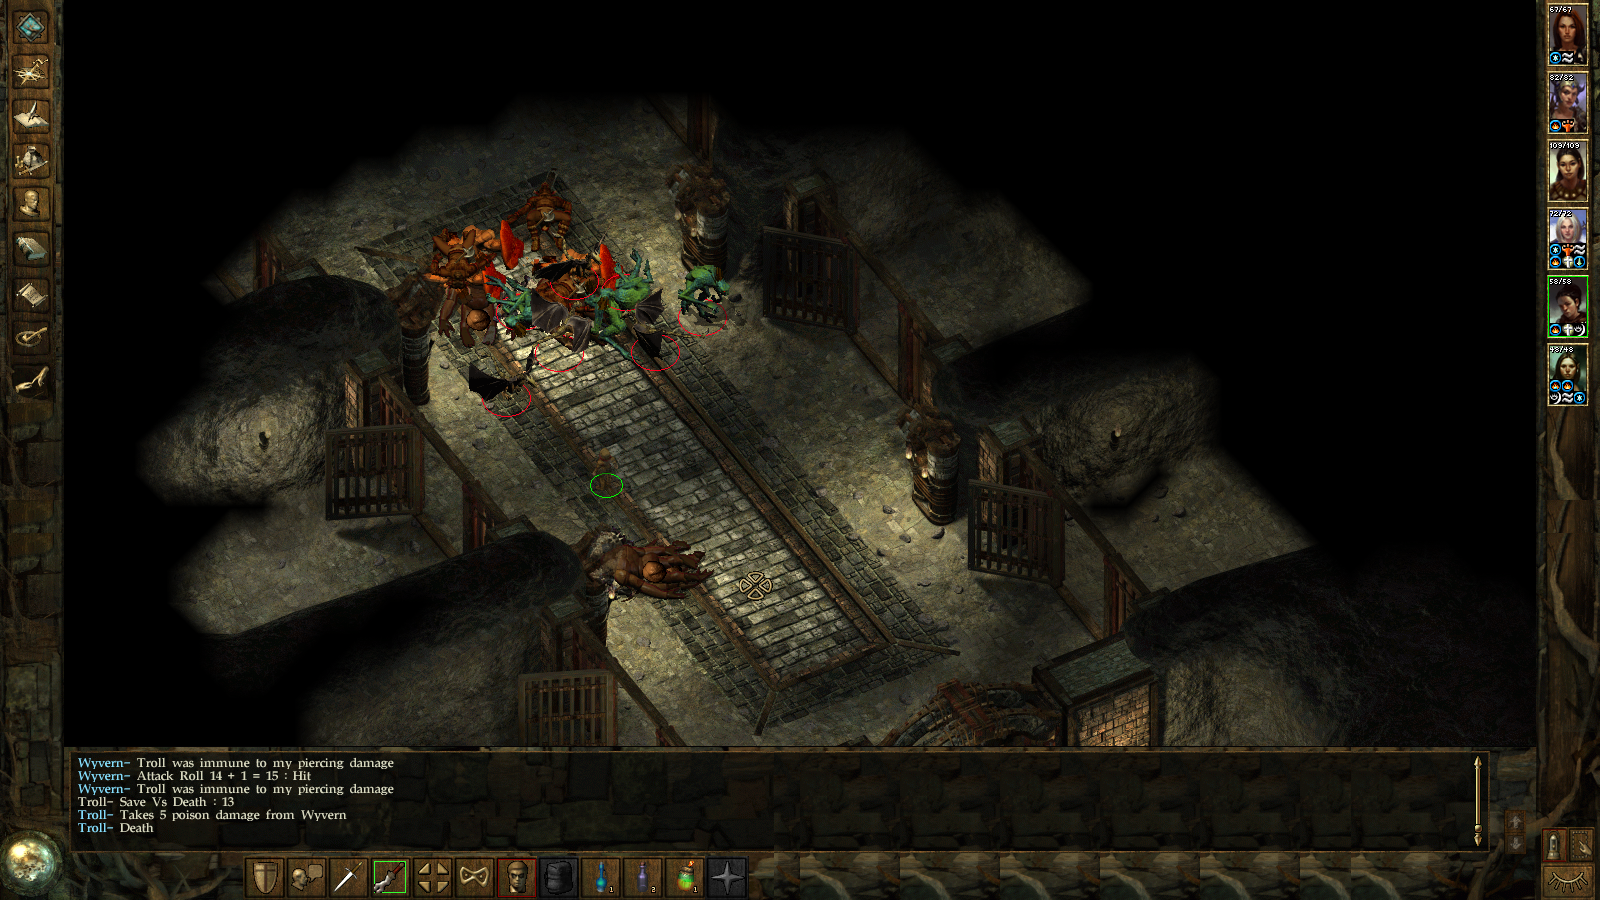 Icewind Dale [12] - Heart of Winter - Blogging Games